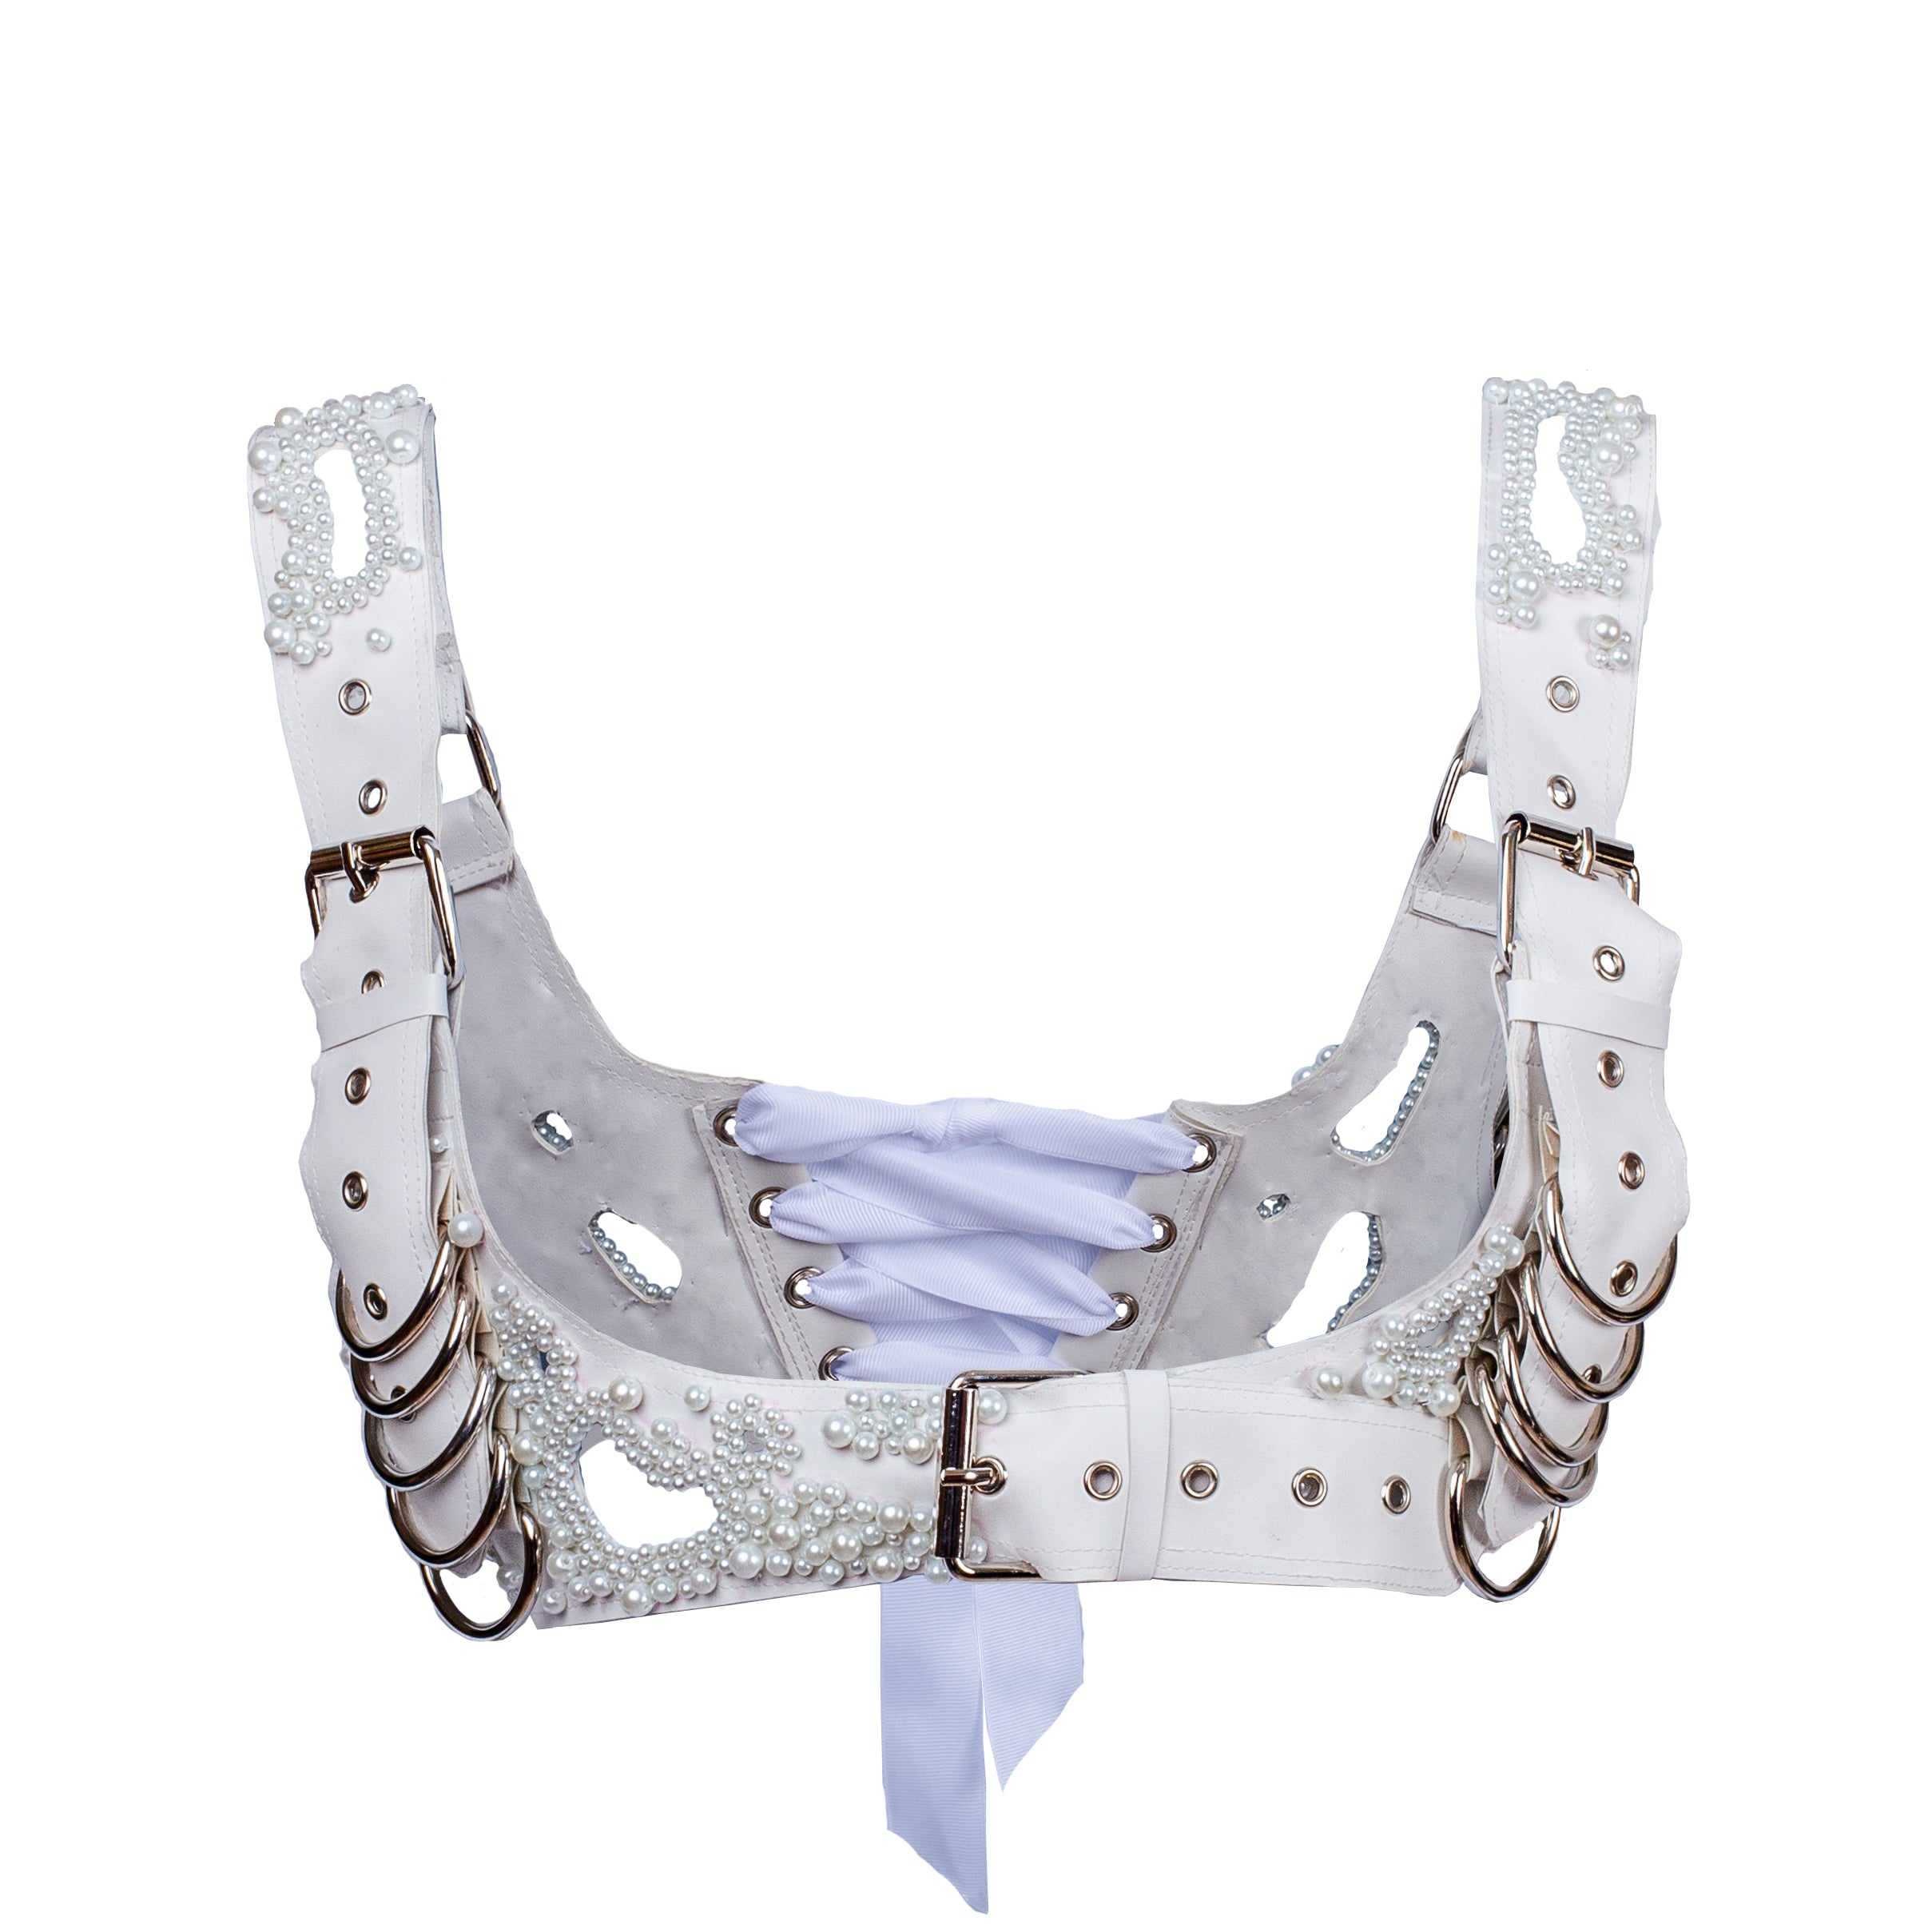 Bound By Pearls Chest Harness